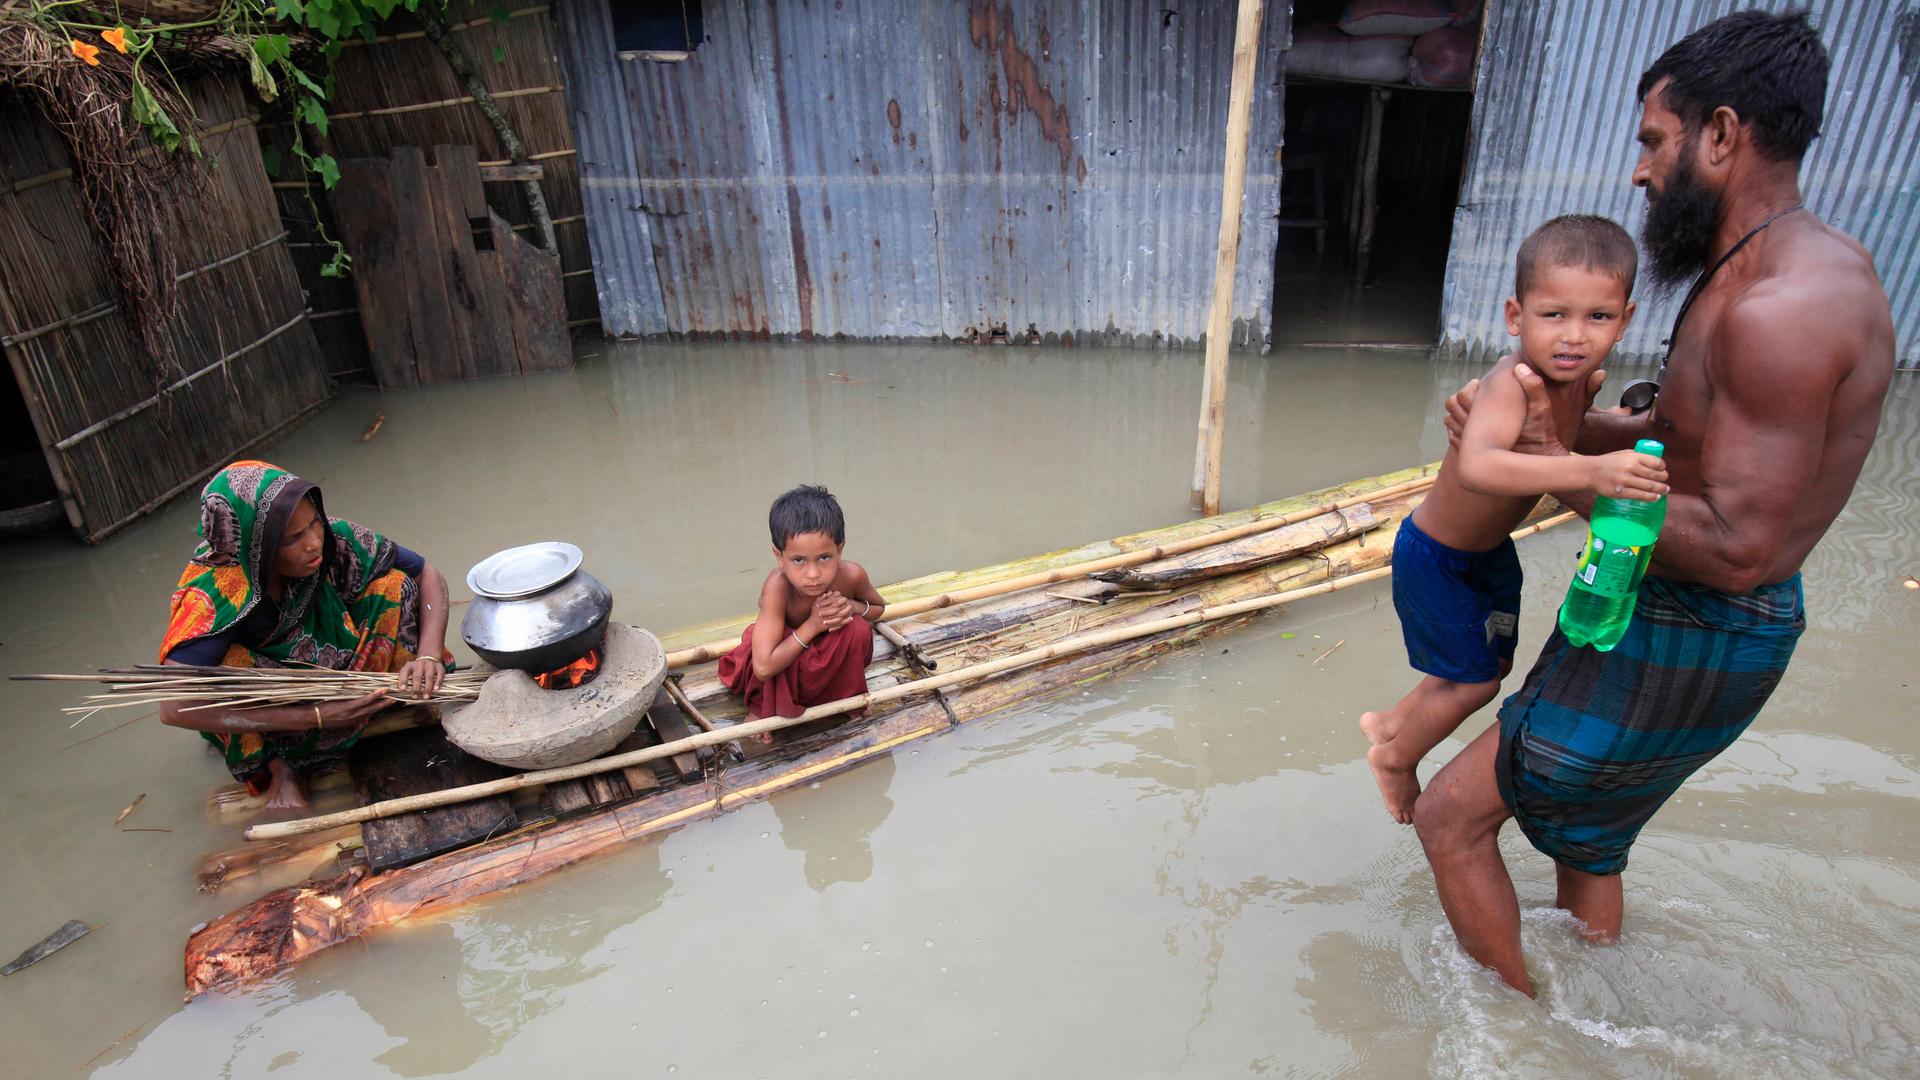 A woman cooks next to her child on a makeshift banana plant raft at a flooded village in Bangladesh July 3, 2012. Low-lying Bangladesh is perhaps the most vulnerable nation to the impacts of climate change. 